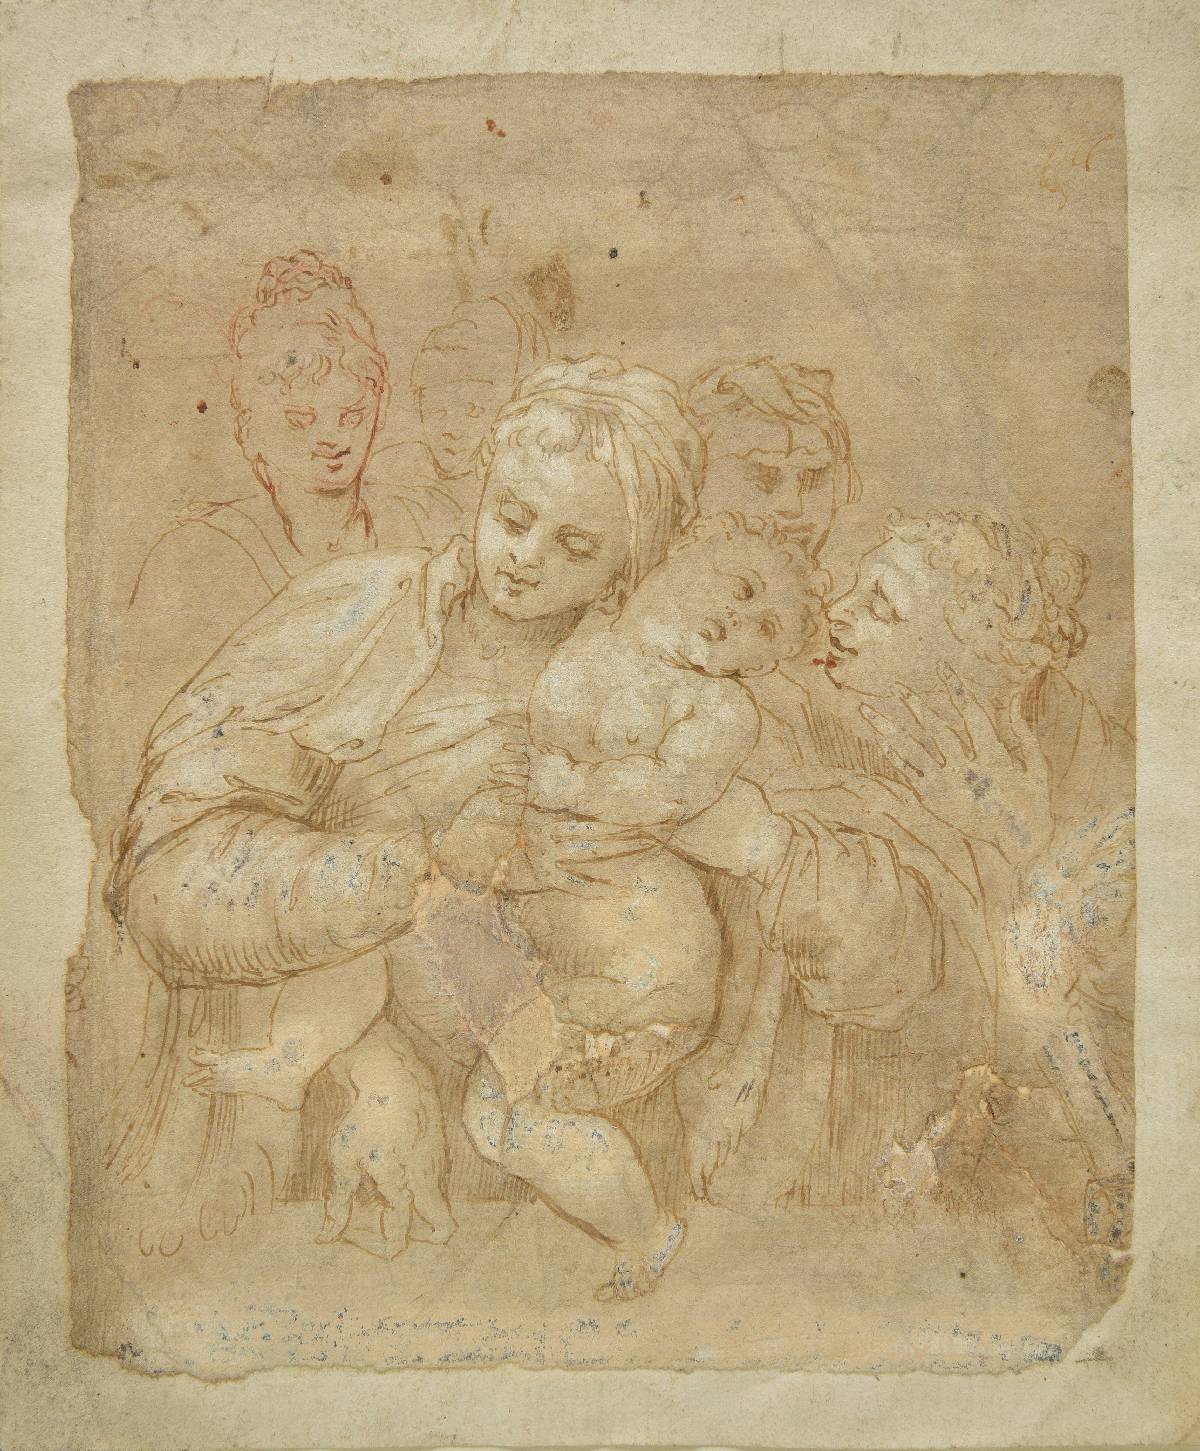 *Italian School. Mother and Child with surrounding figures, 17th century, pen and brown ink, brown